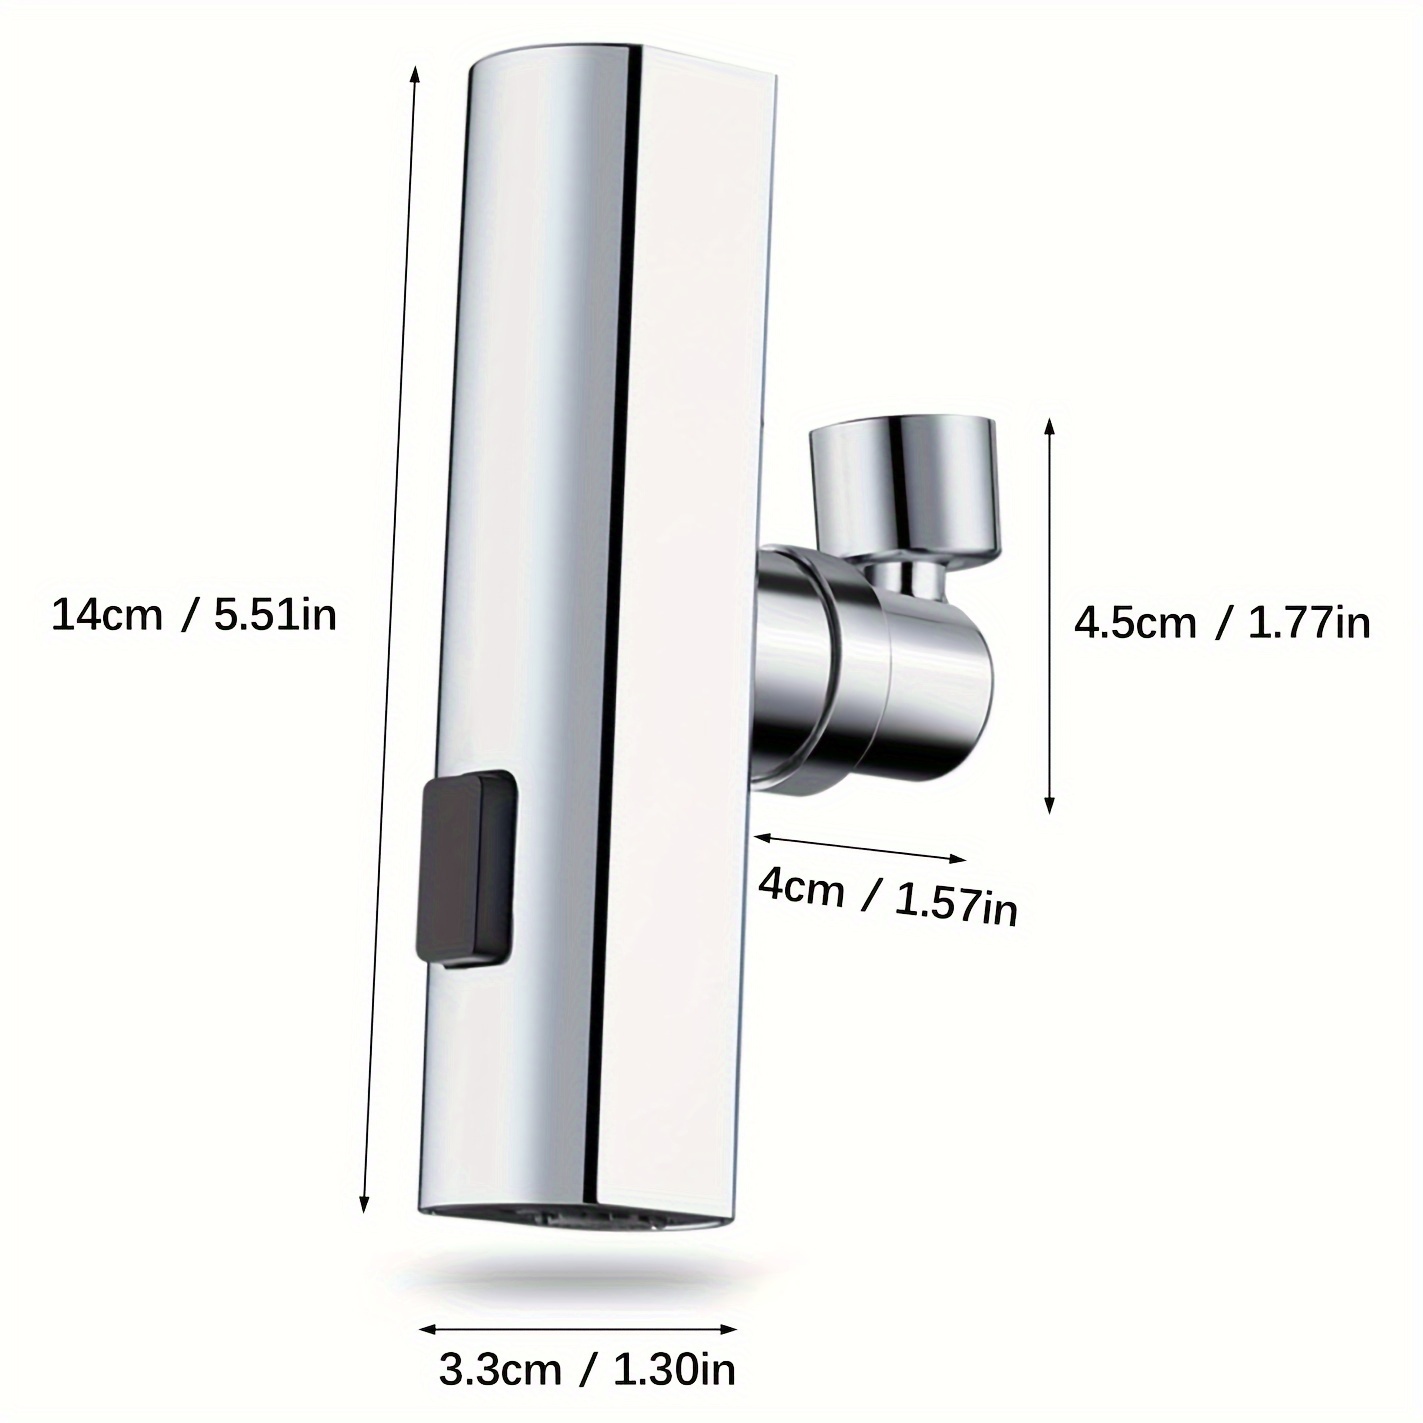 3 in 1 360° Waterfall Kitchen Faucet, Touch Kitchen Faucets, Faucet Extender for Kitchen Sink, Swivel Waterfall Kitchen Faucet for Washing Vegetable Fruit details 2